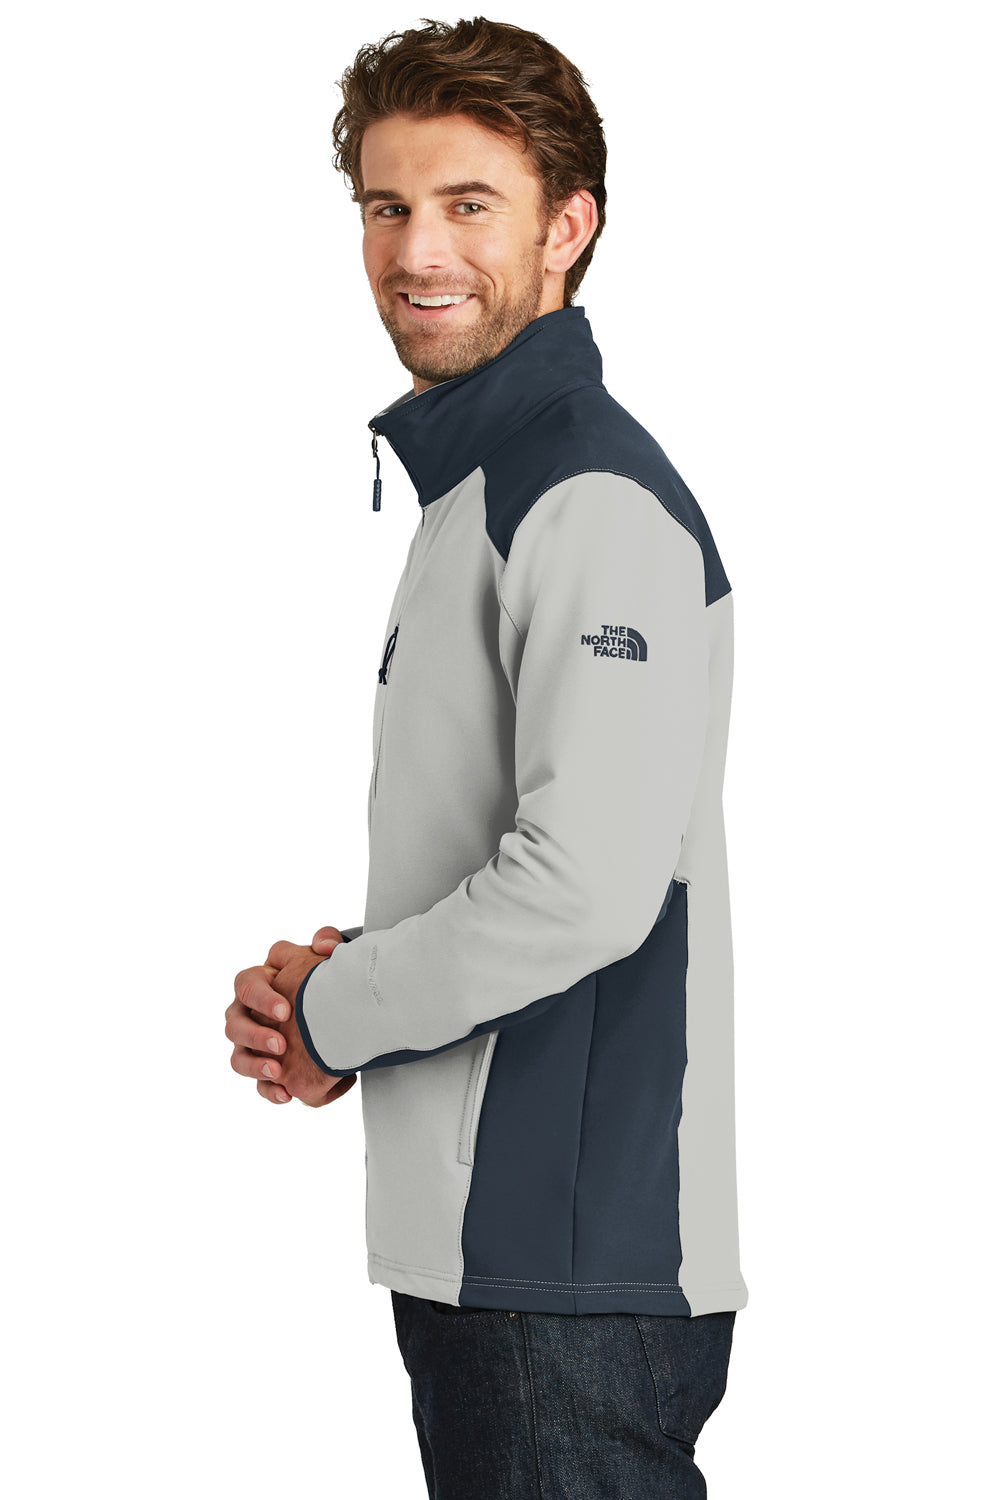 The North Face NF0A3LGV Mens Tech Wind & Water Resistant Full Zip Jacket Mid Grey/Navy Blue Side